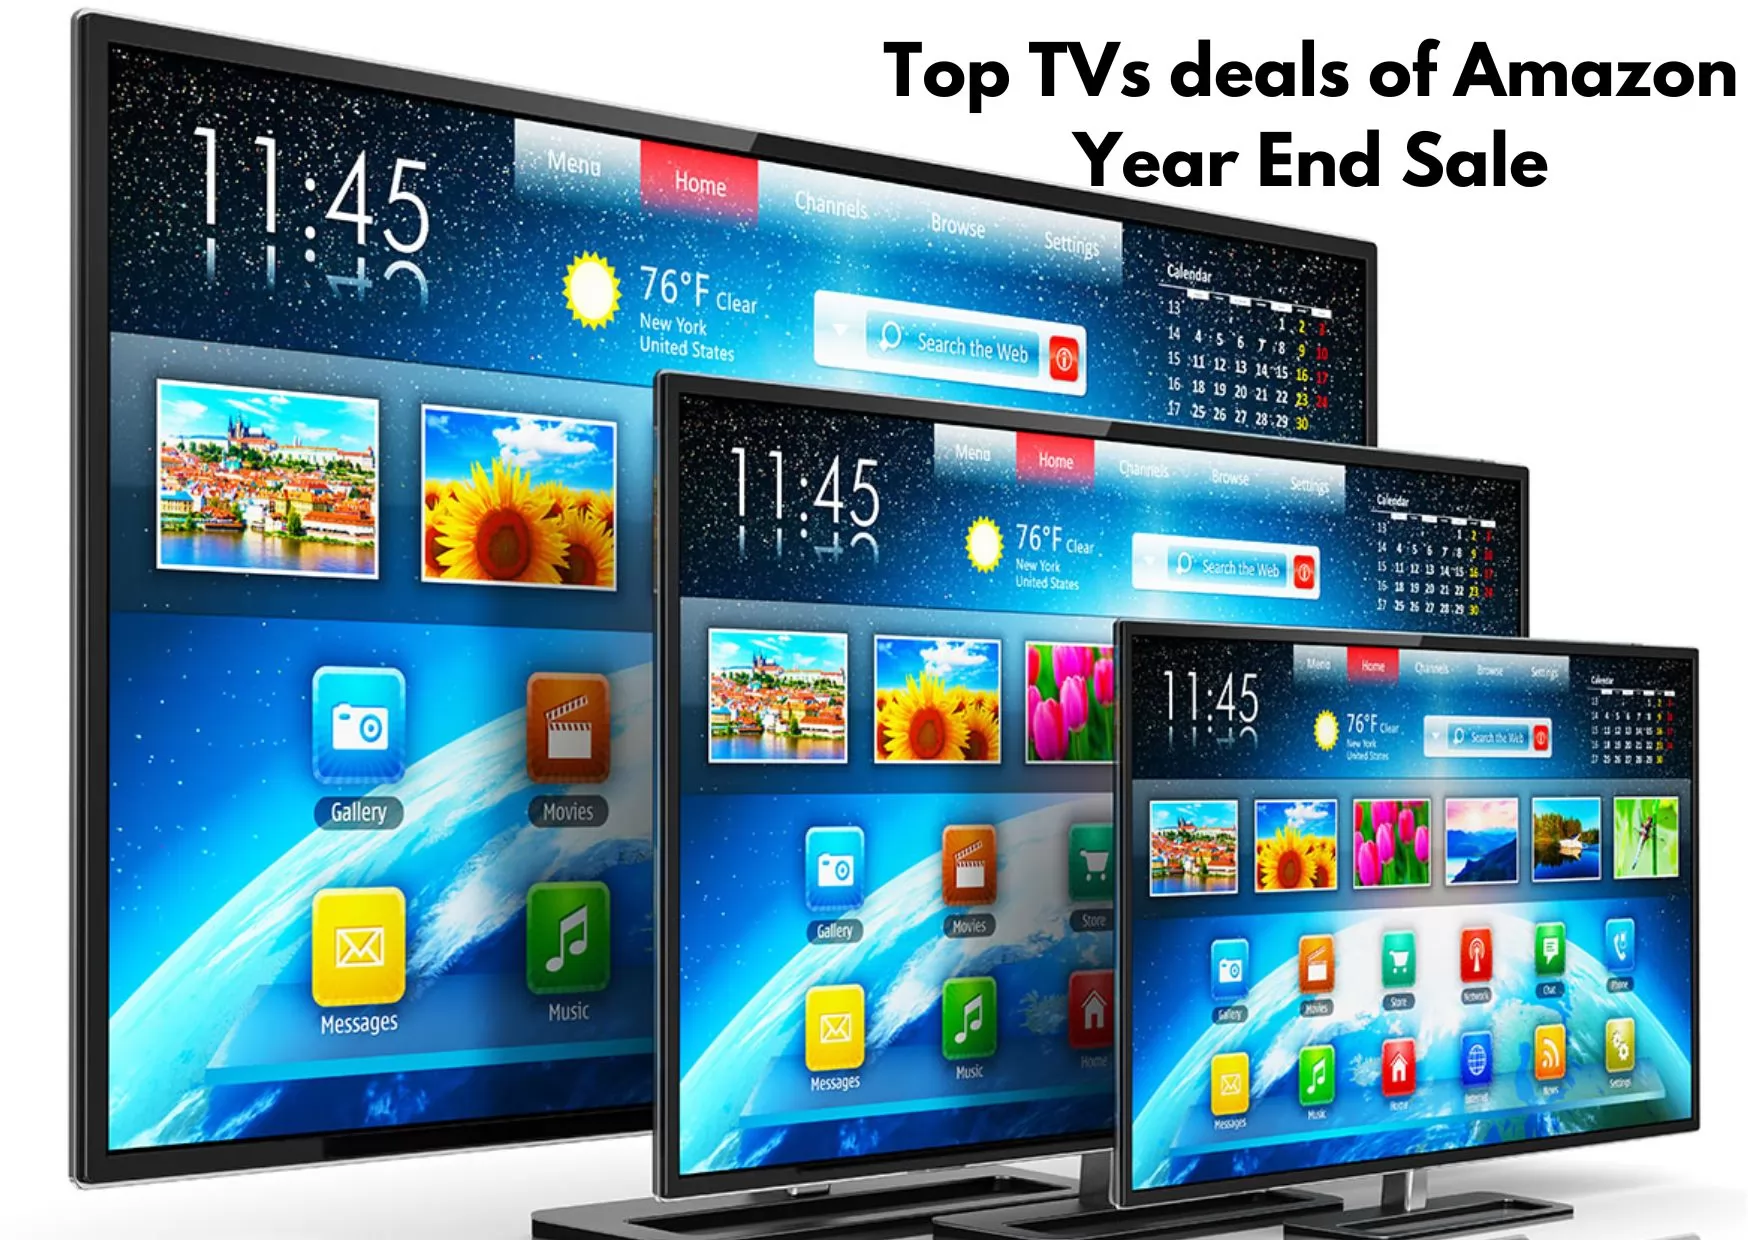 Top TVs deals of Amazon Year End Sale